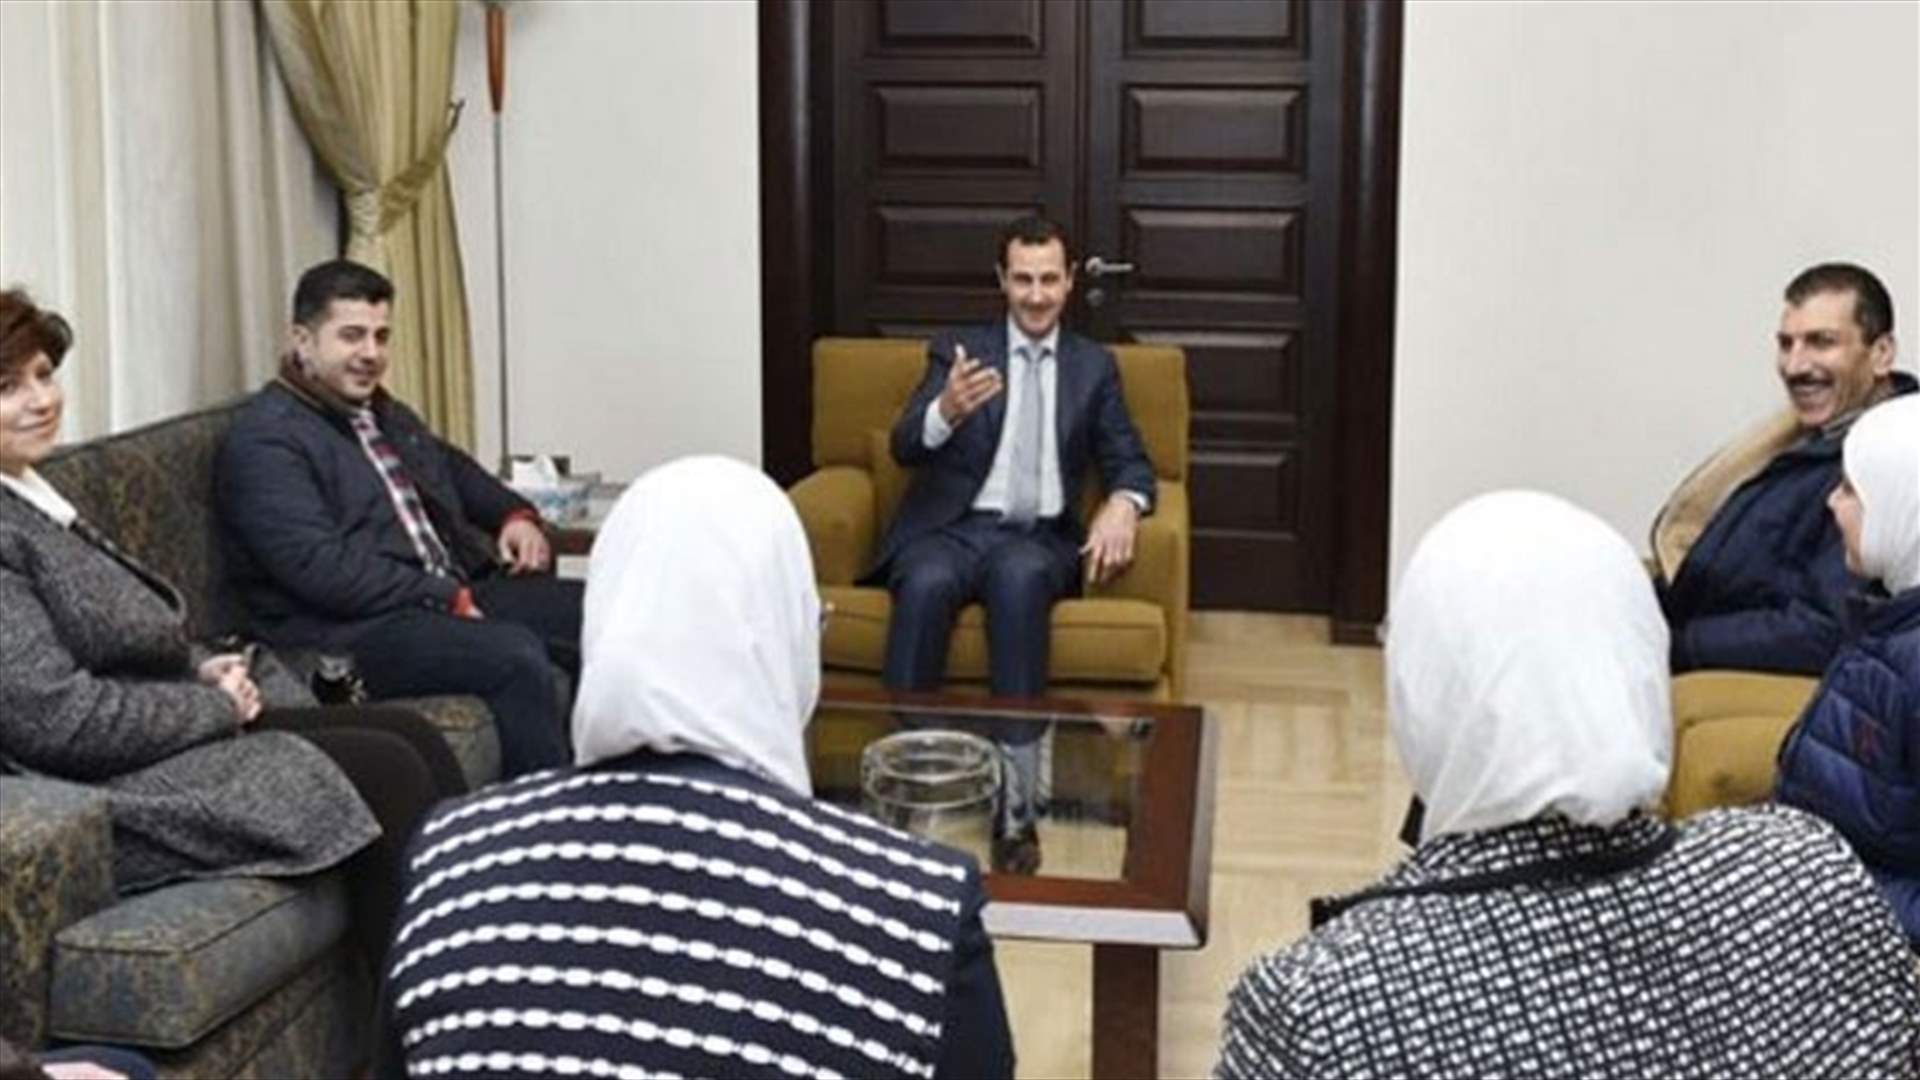 Syrian President Assad meets with Damascus manufacturers